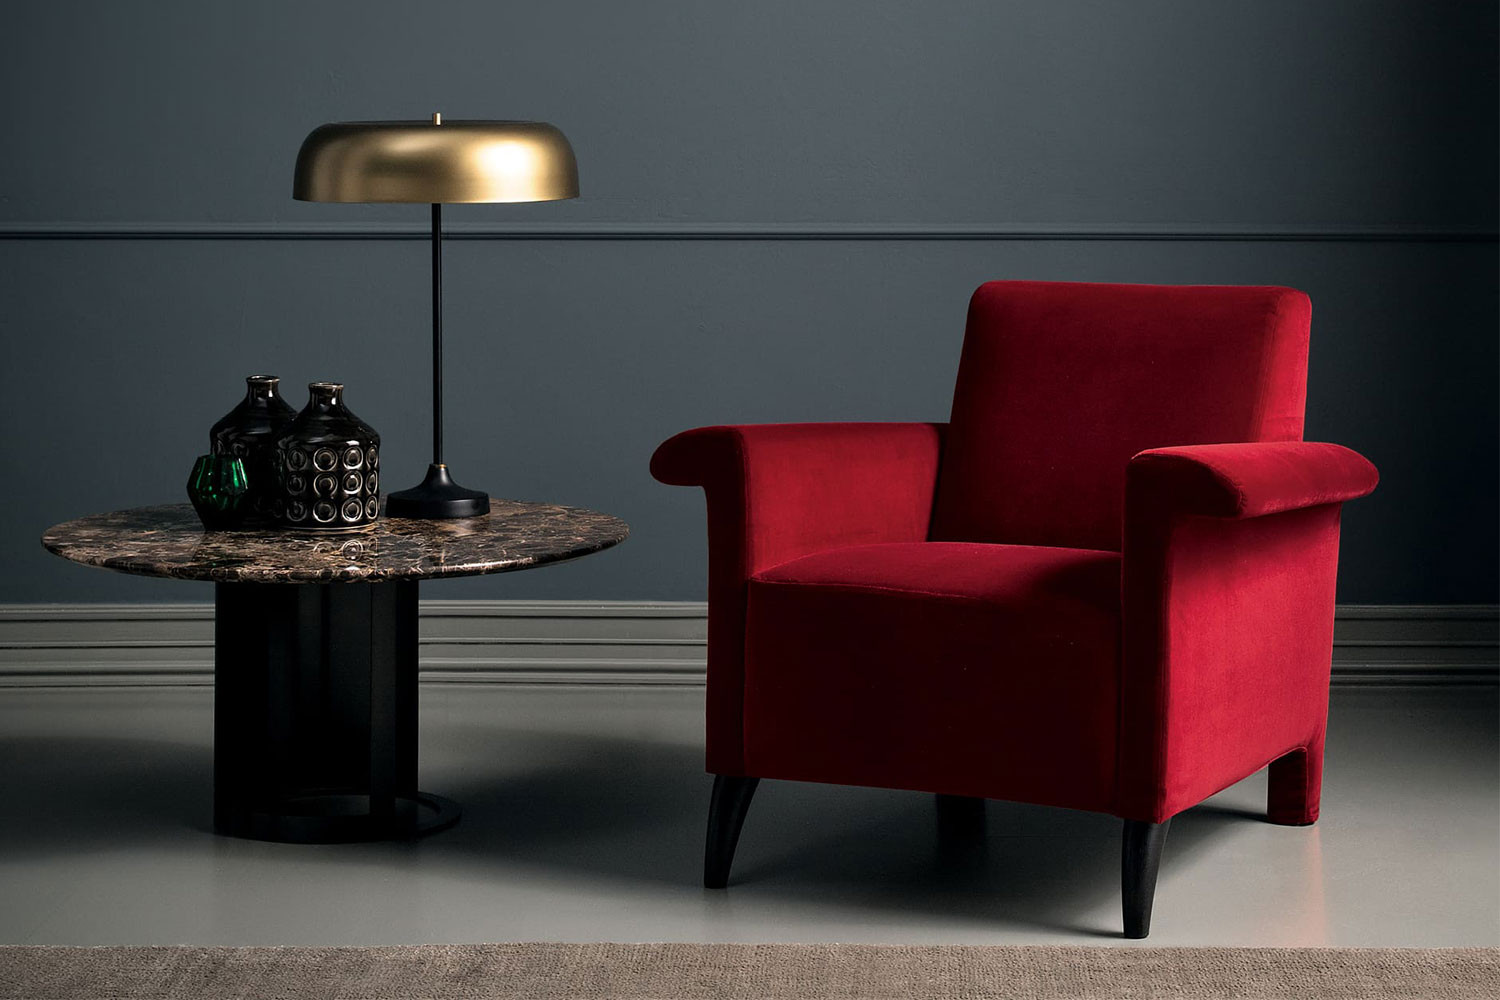 Single seat transitional armchair with winged arms and tapered legs